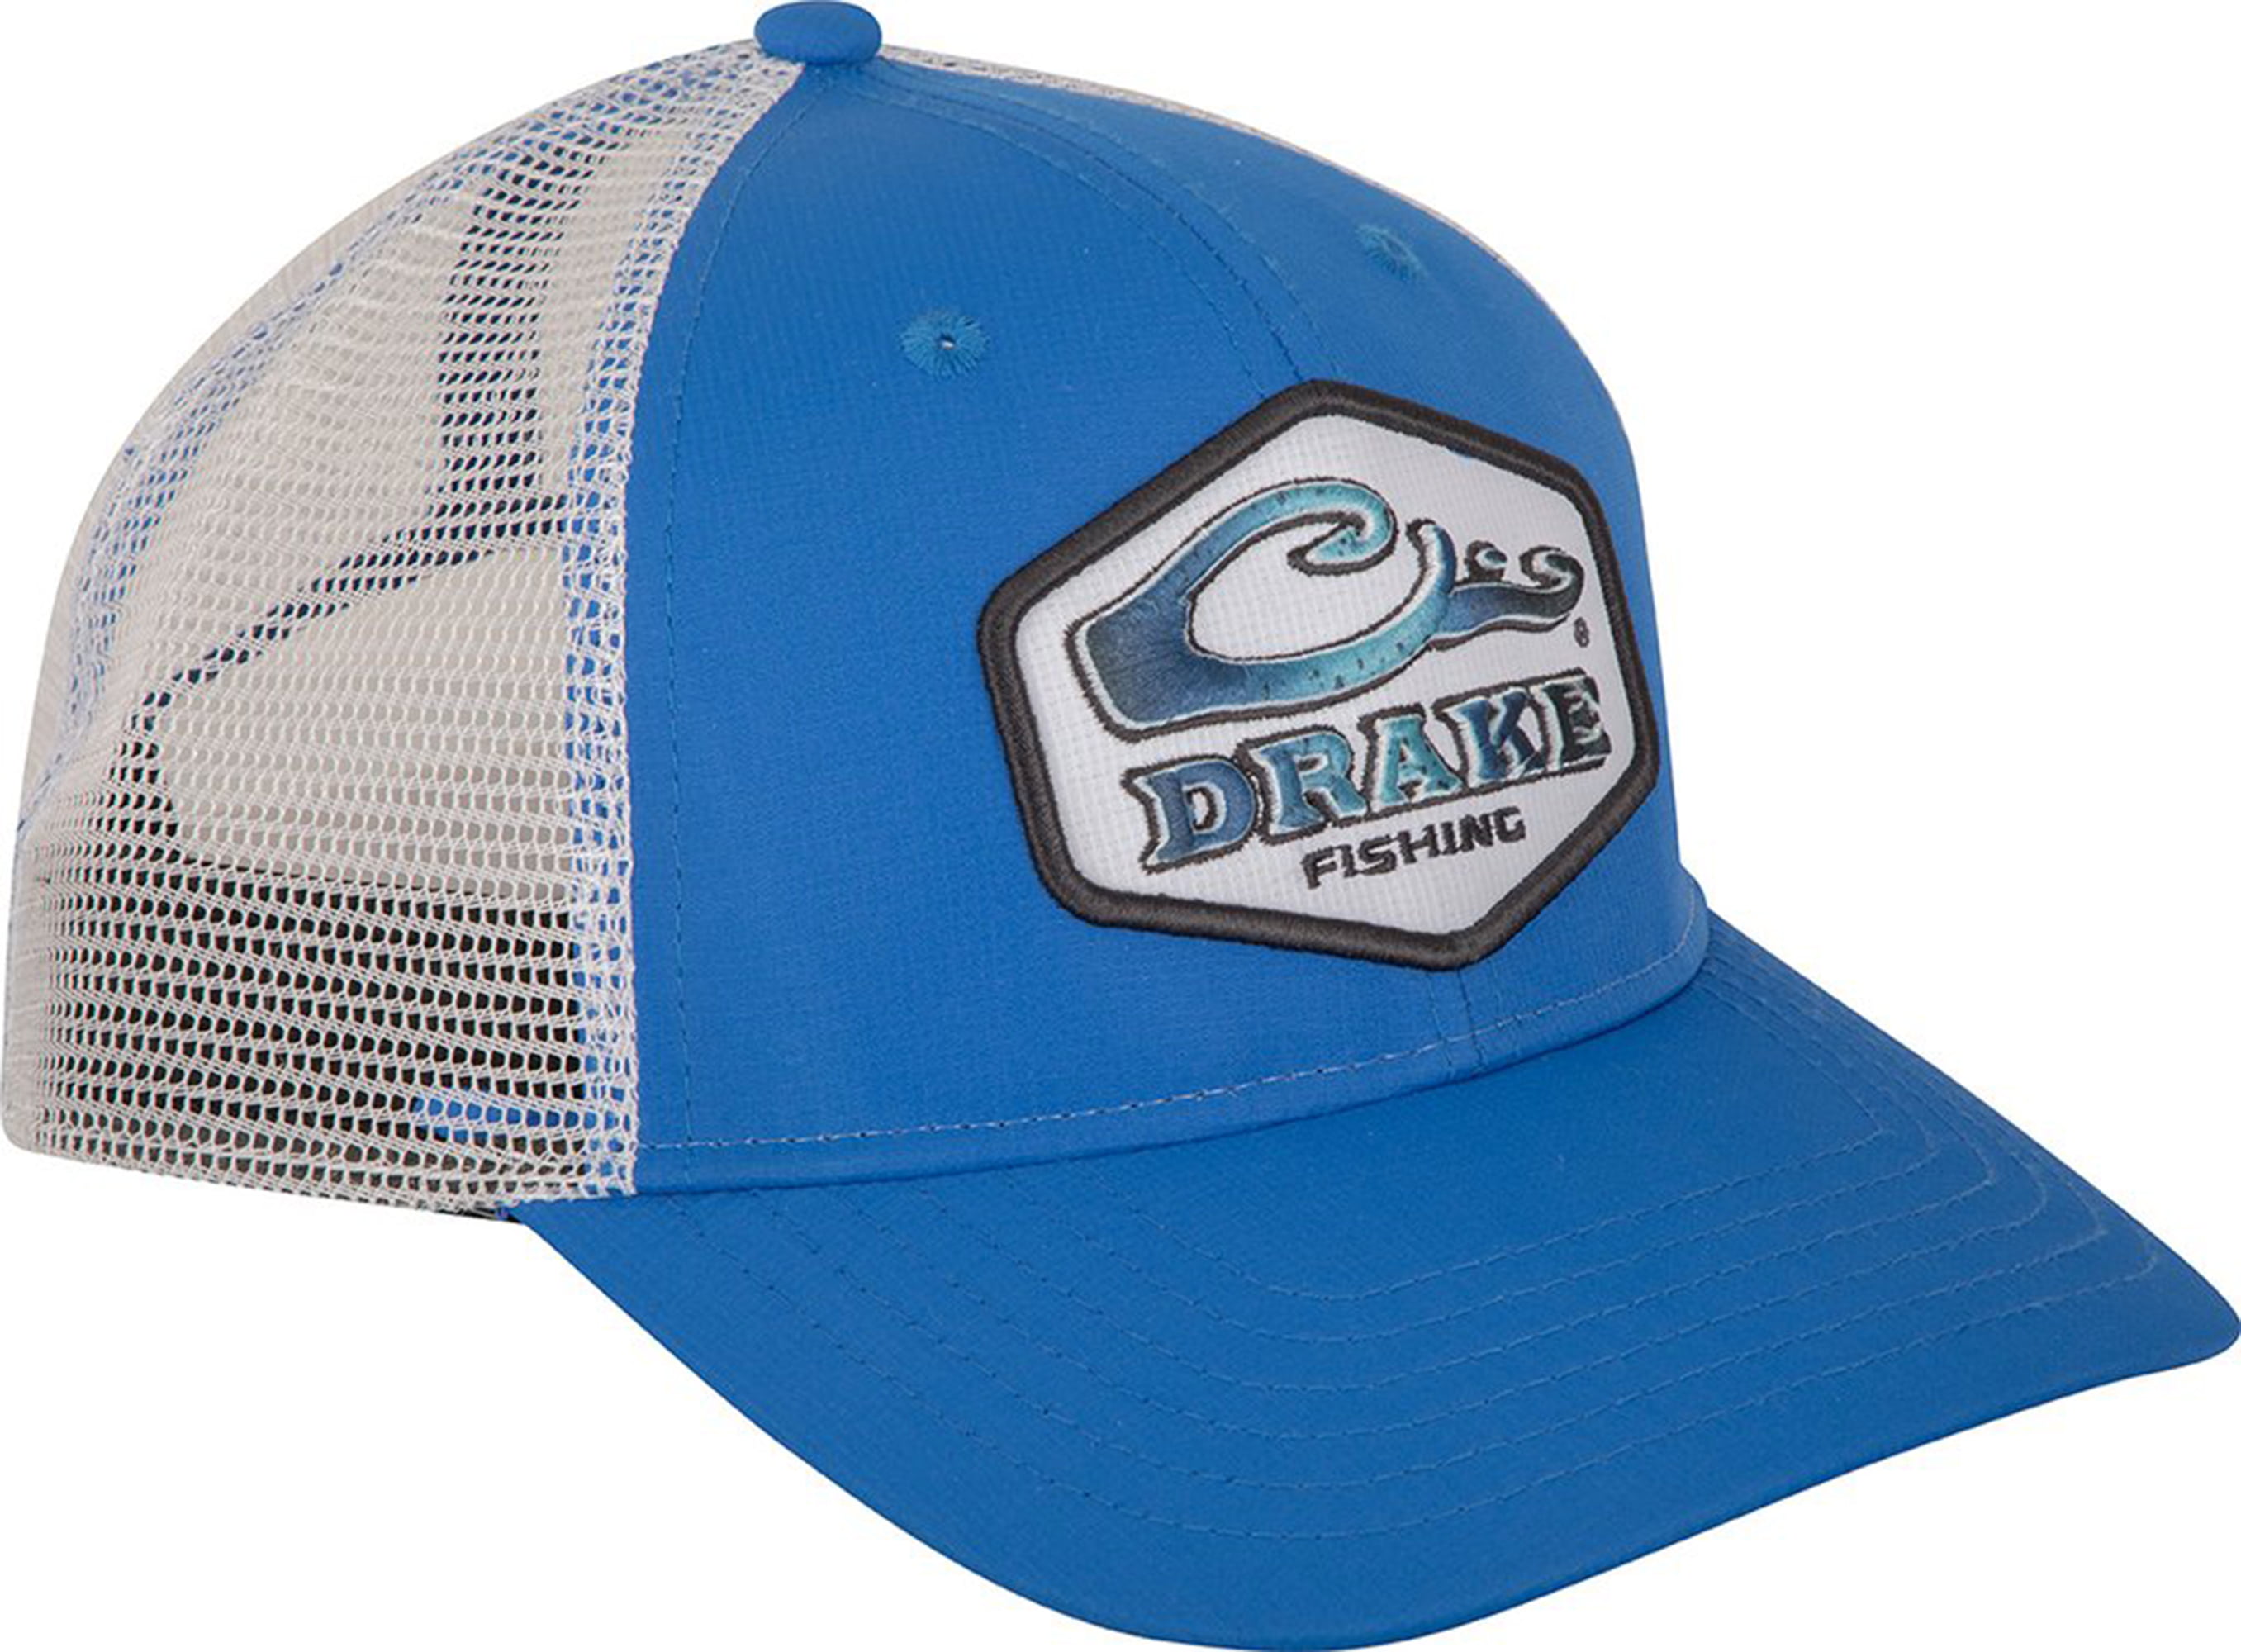 DRAKE WATERFOWL SYSTEMS ARC PATCH LOGO MESH BACK BALL CAP SNAP BACK TRUCKER HAT 